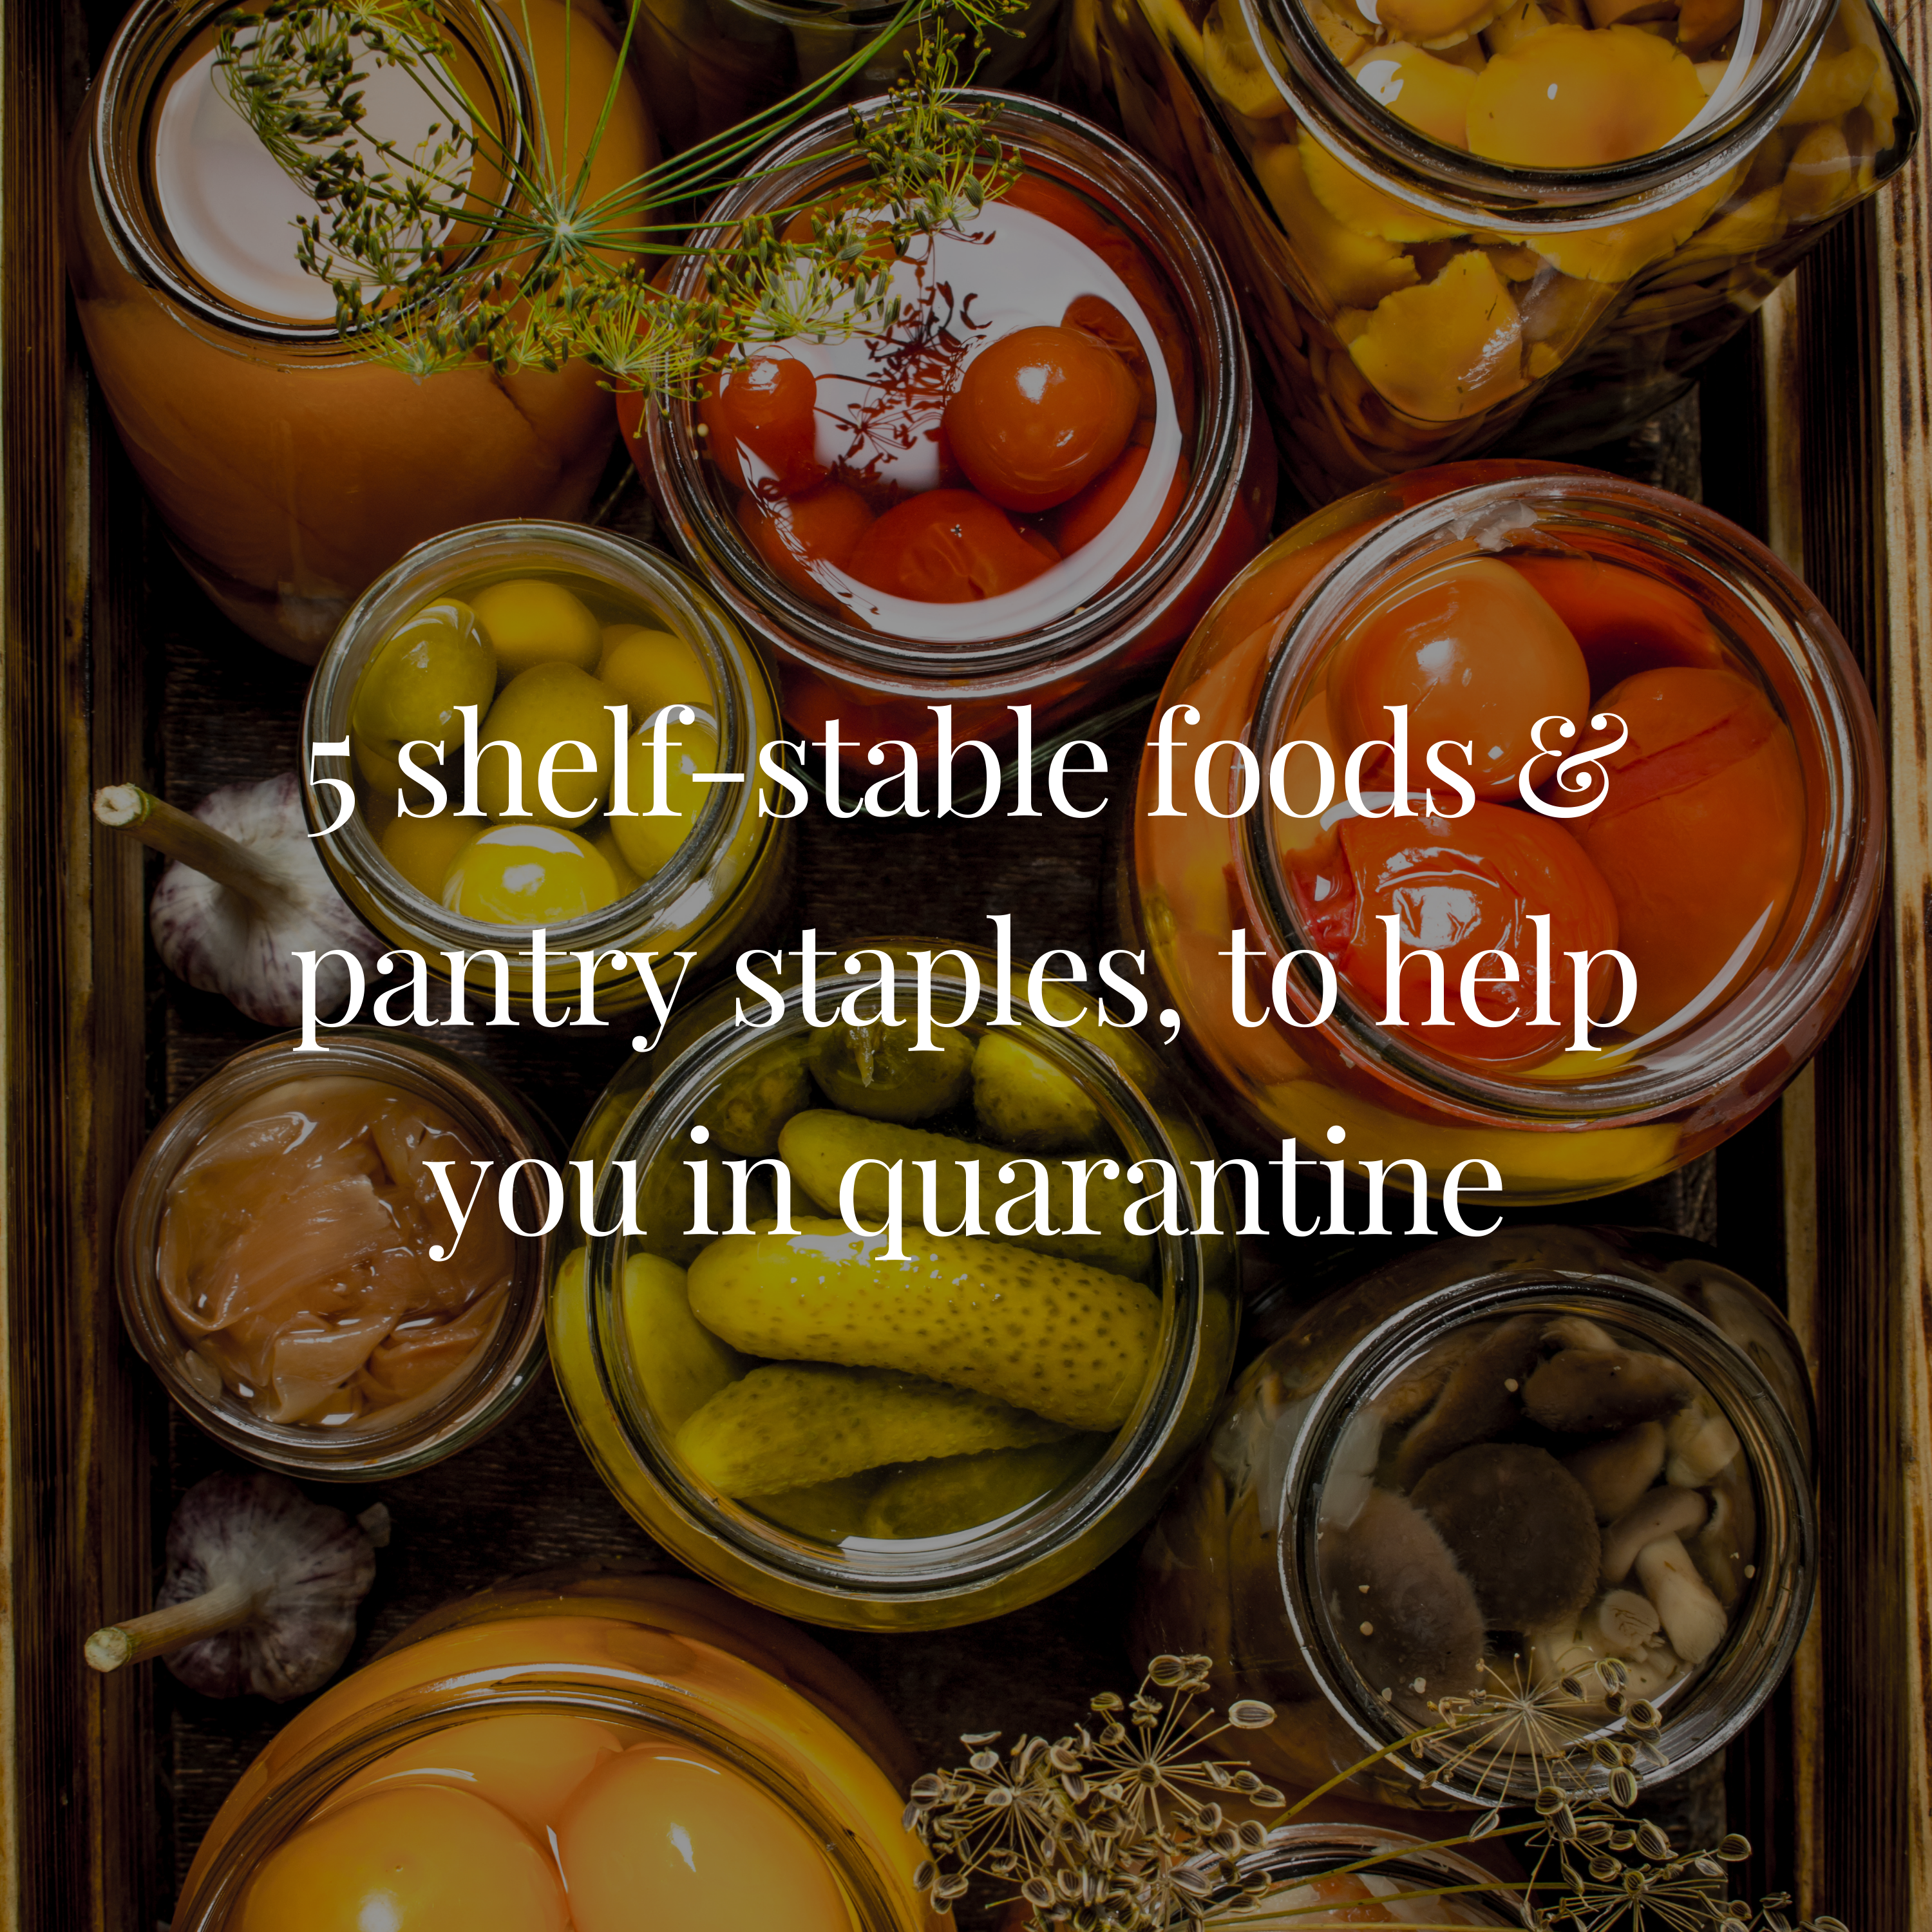 5 shelf-stable foods & pantry staples, to help you in quarantine